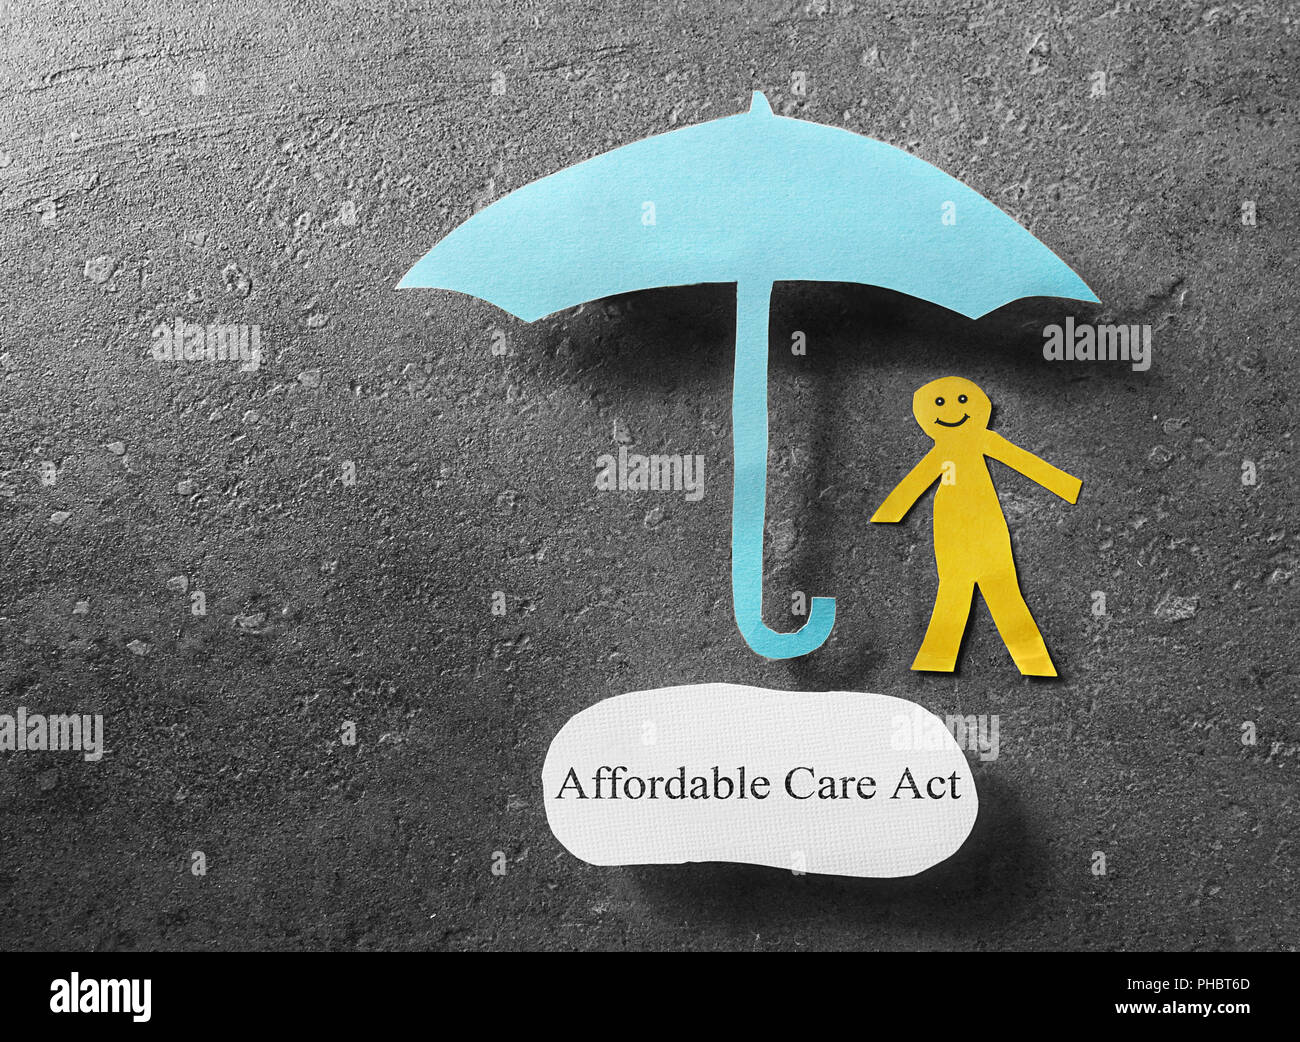 Affordable Care Act umbrella Stock Photo